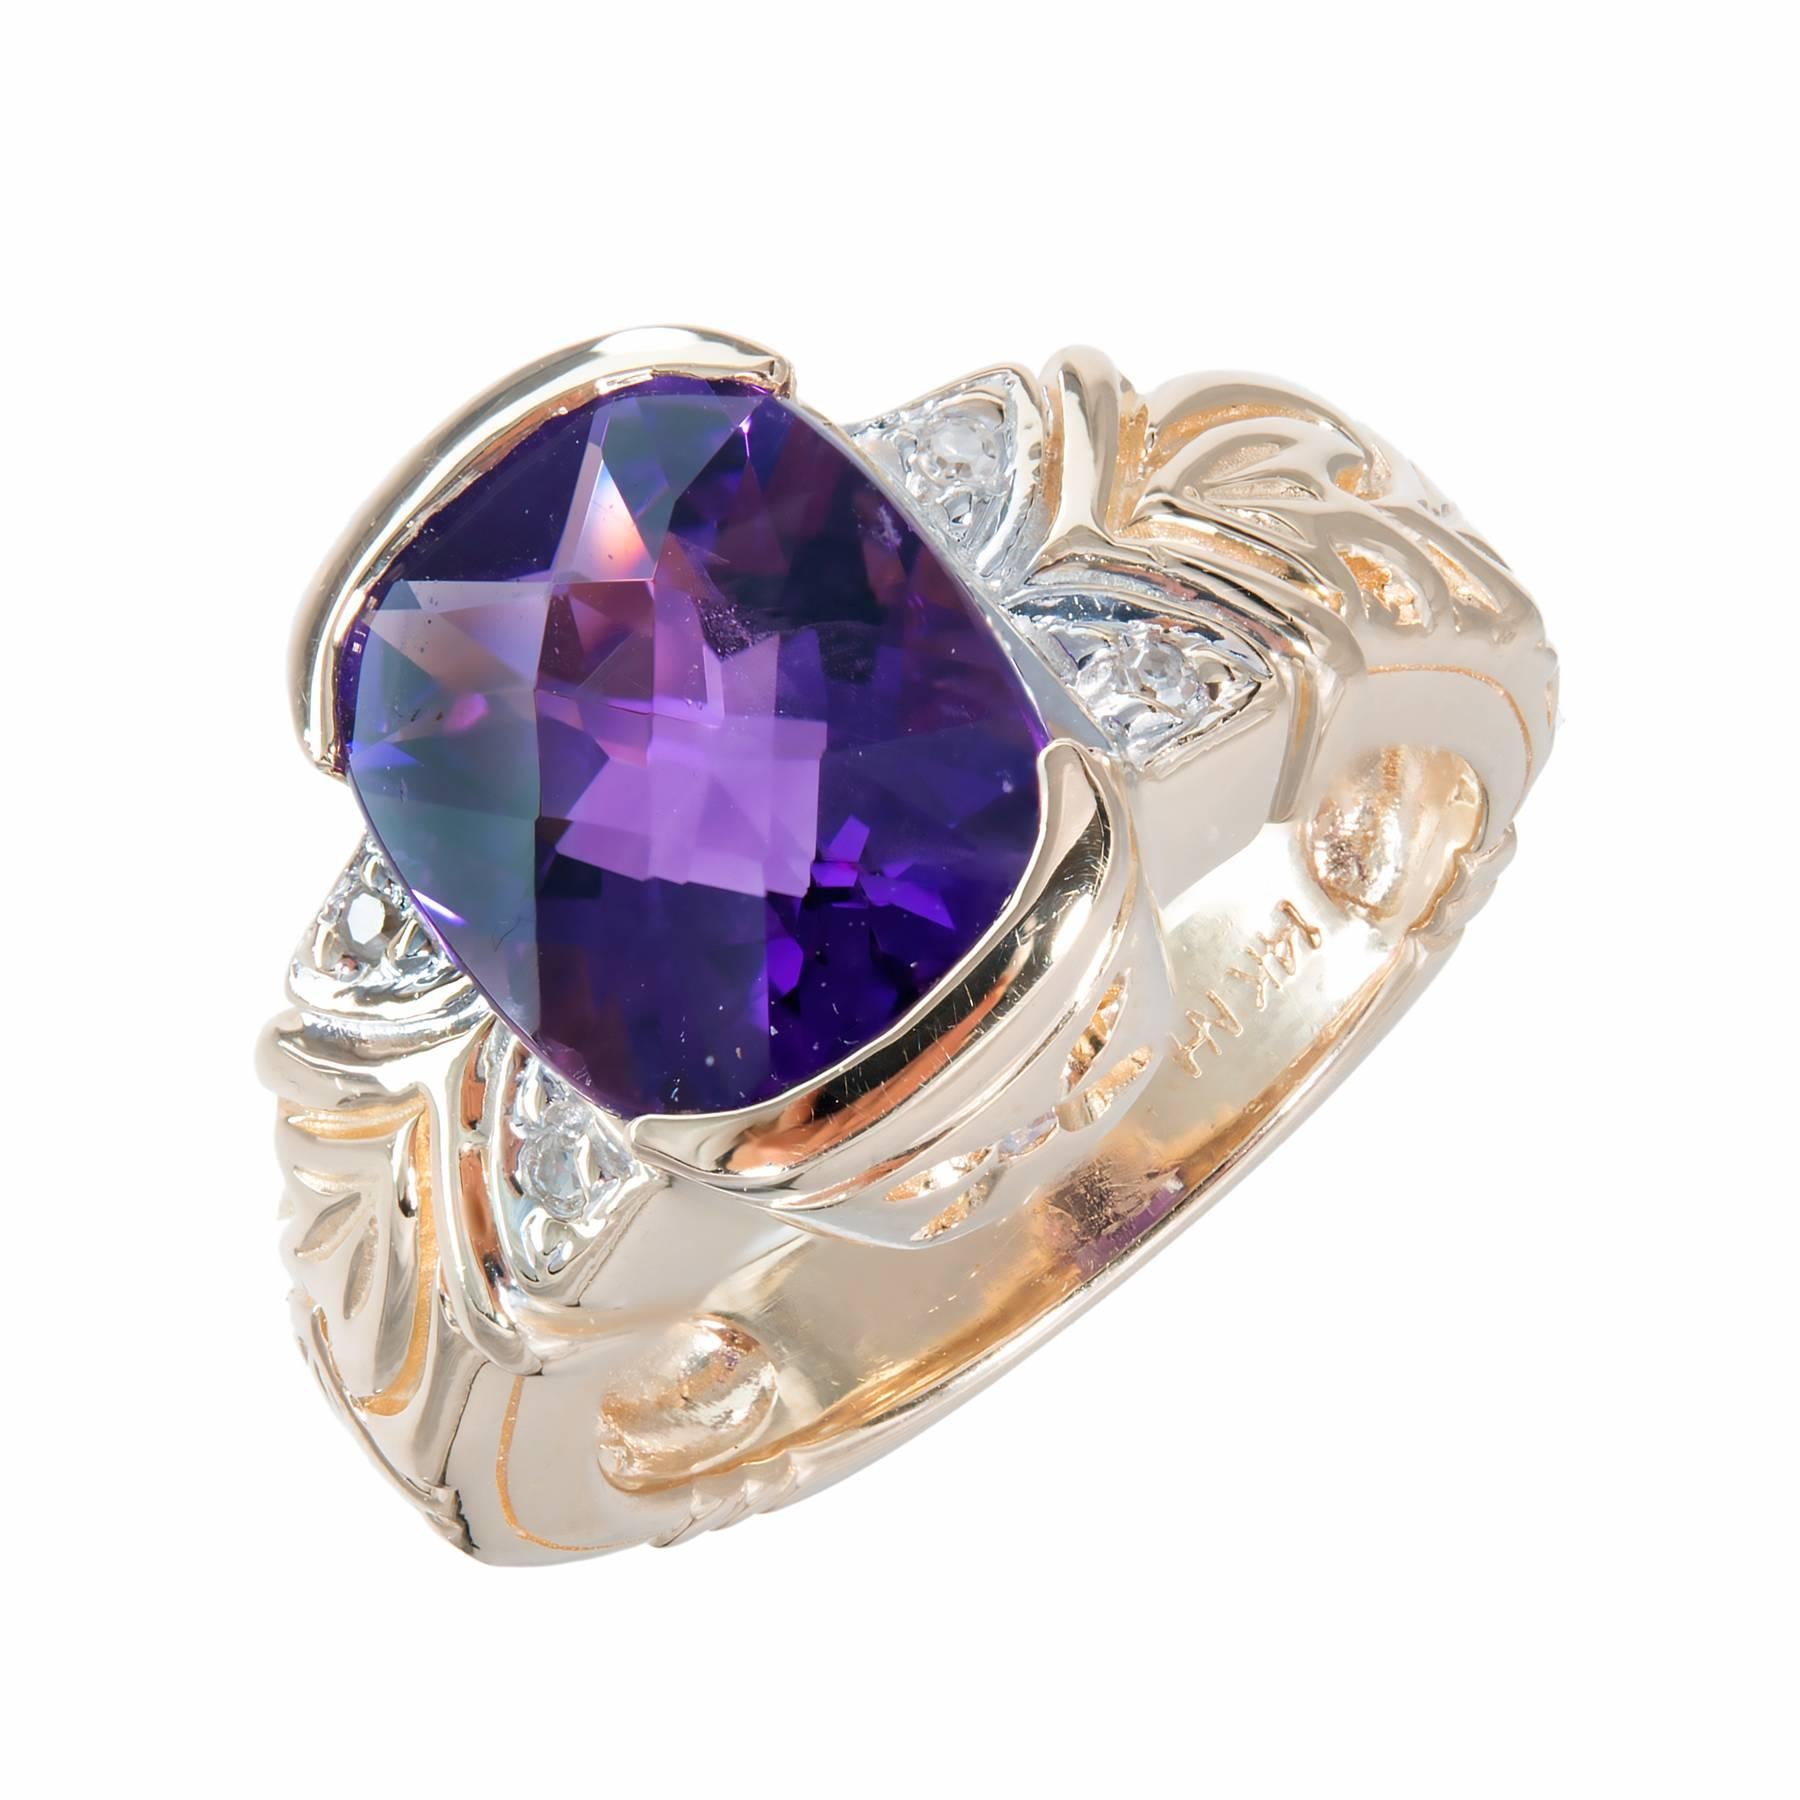 14k Yellow gold semi bezel bright purple amethyst and diamond ring. 

1 cushion bright purple checkerboard cut Amethyst, approx. total weight 2.50cts, VS – SI, 10.50 x 9.05 x 6.27mm
4 round diamonds approx. total weight .04cts, I, SI
Size 6 and